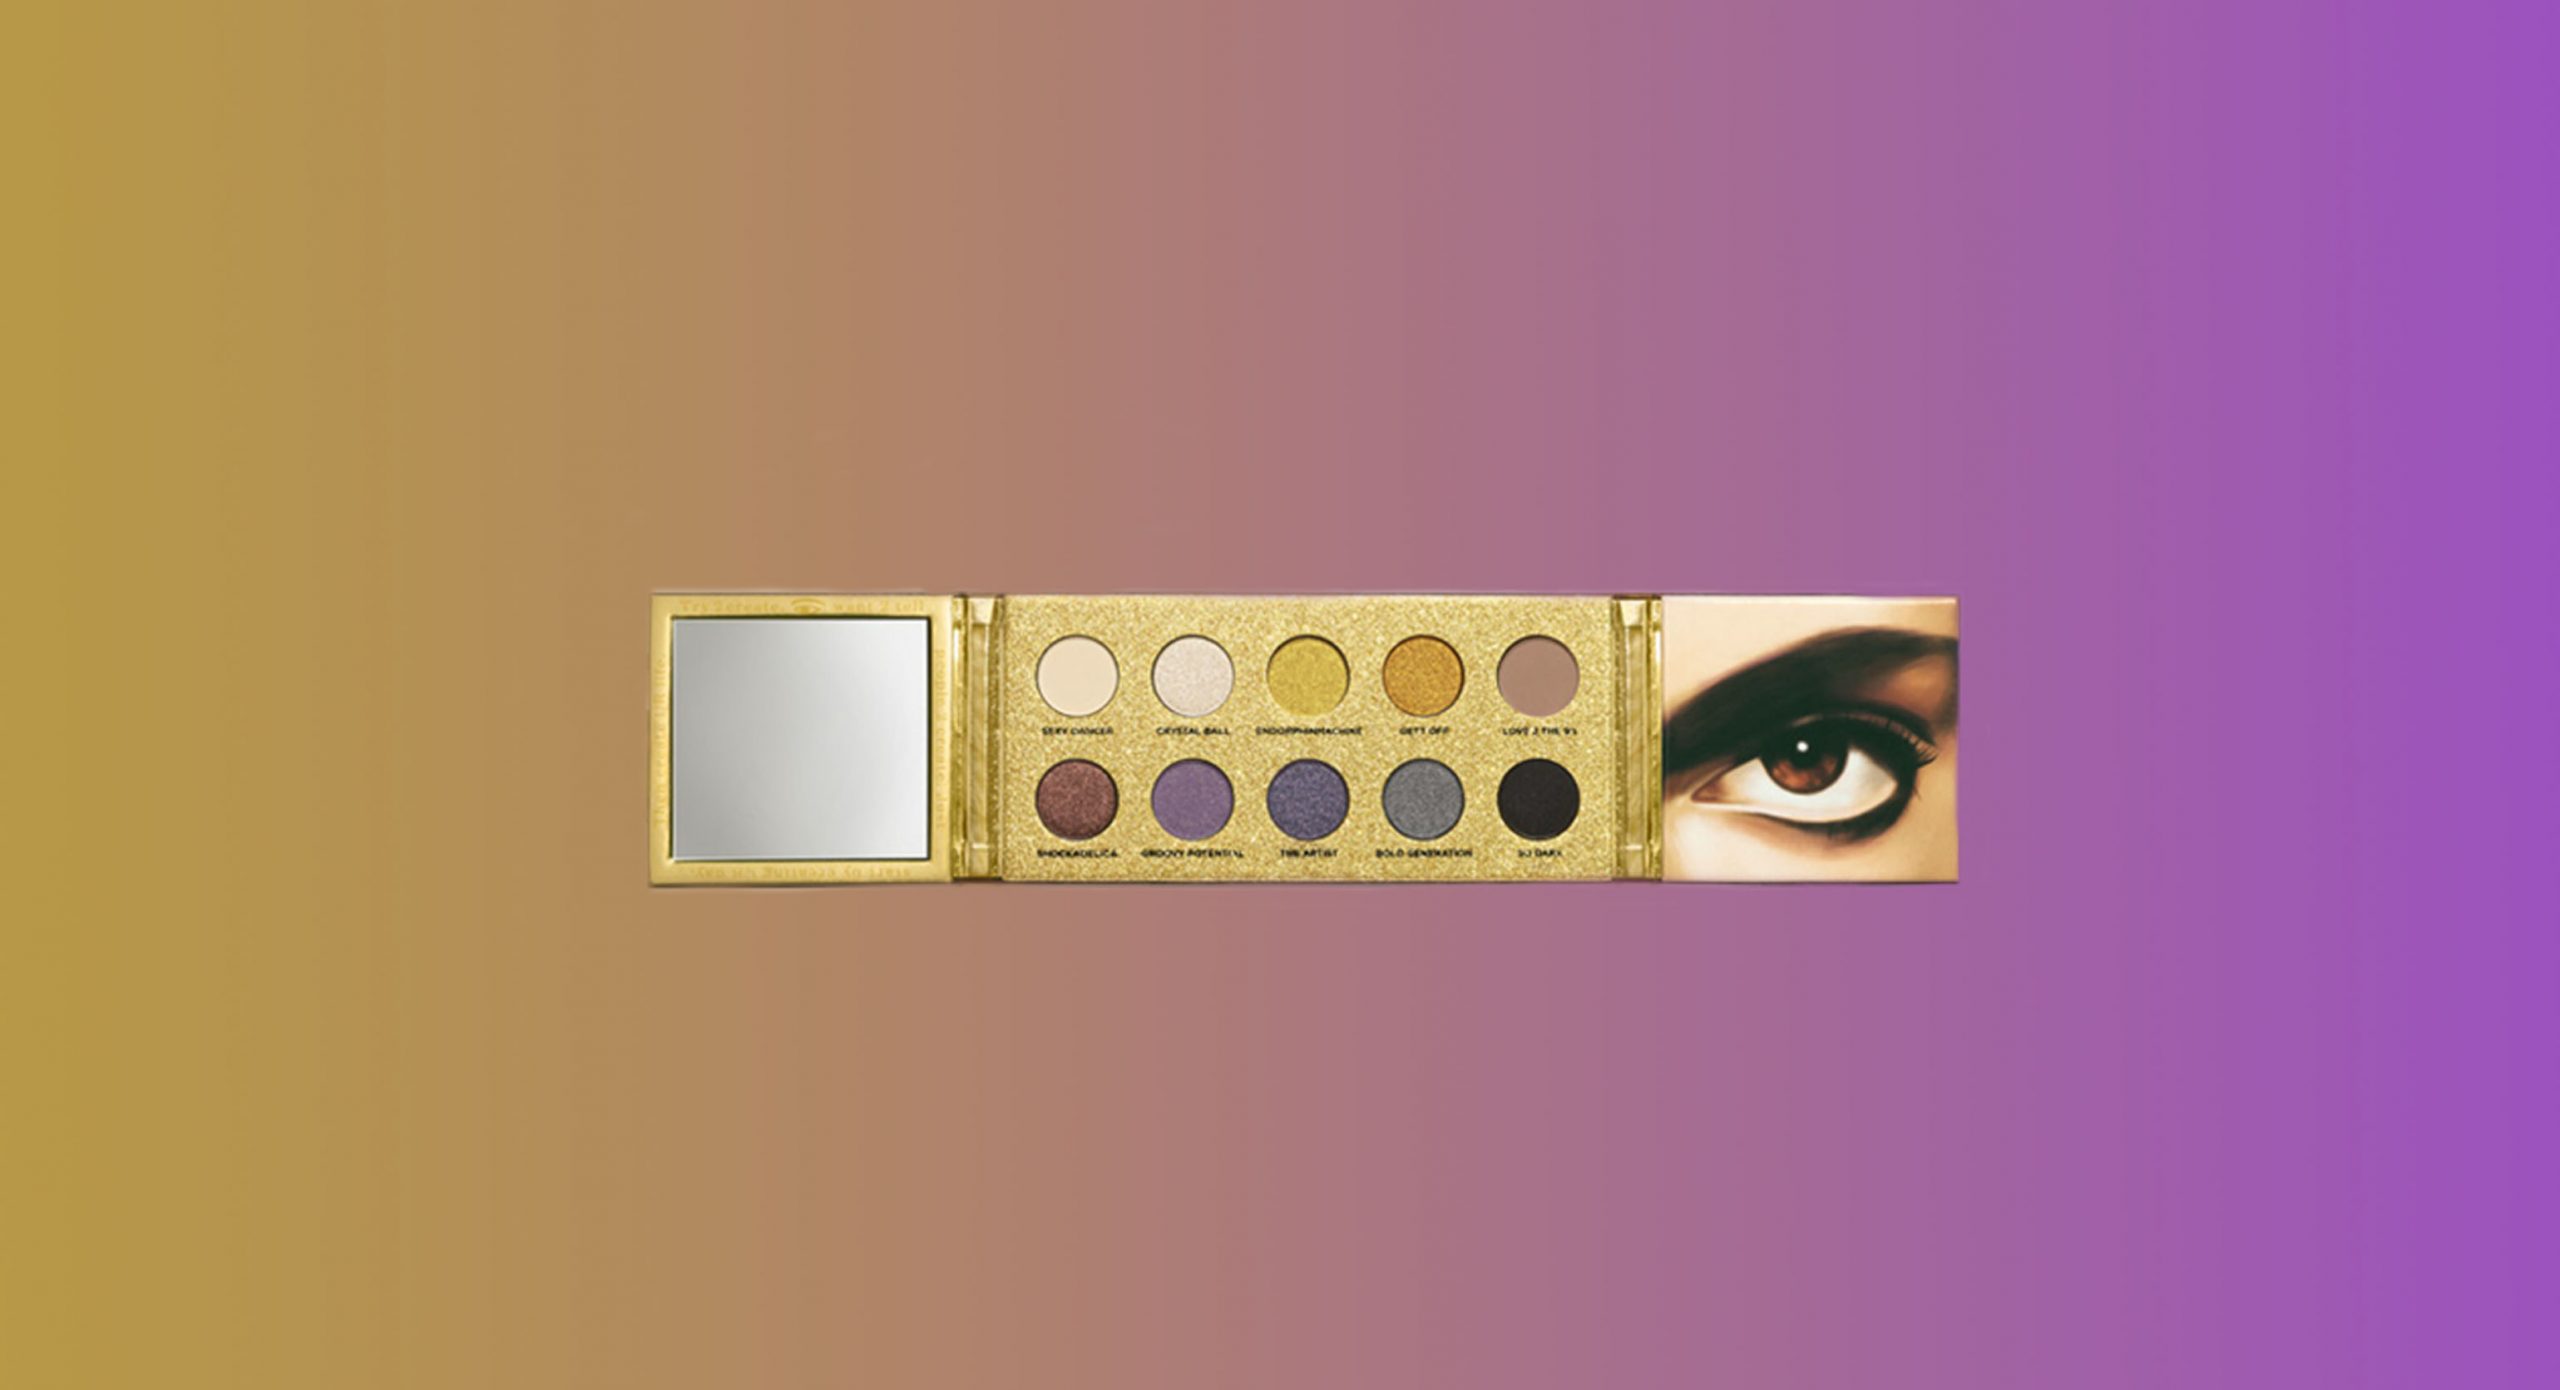 Get A First Look At Urban Decay’s Prince-Inspired Makeup Line